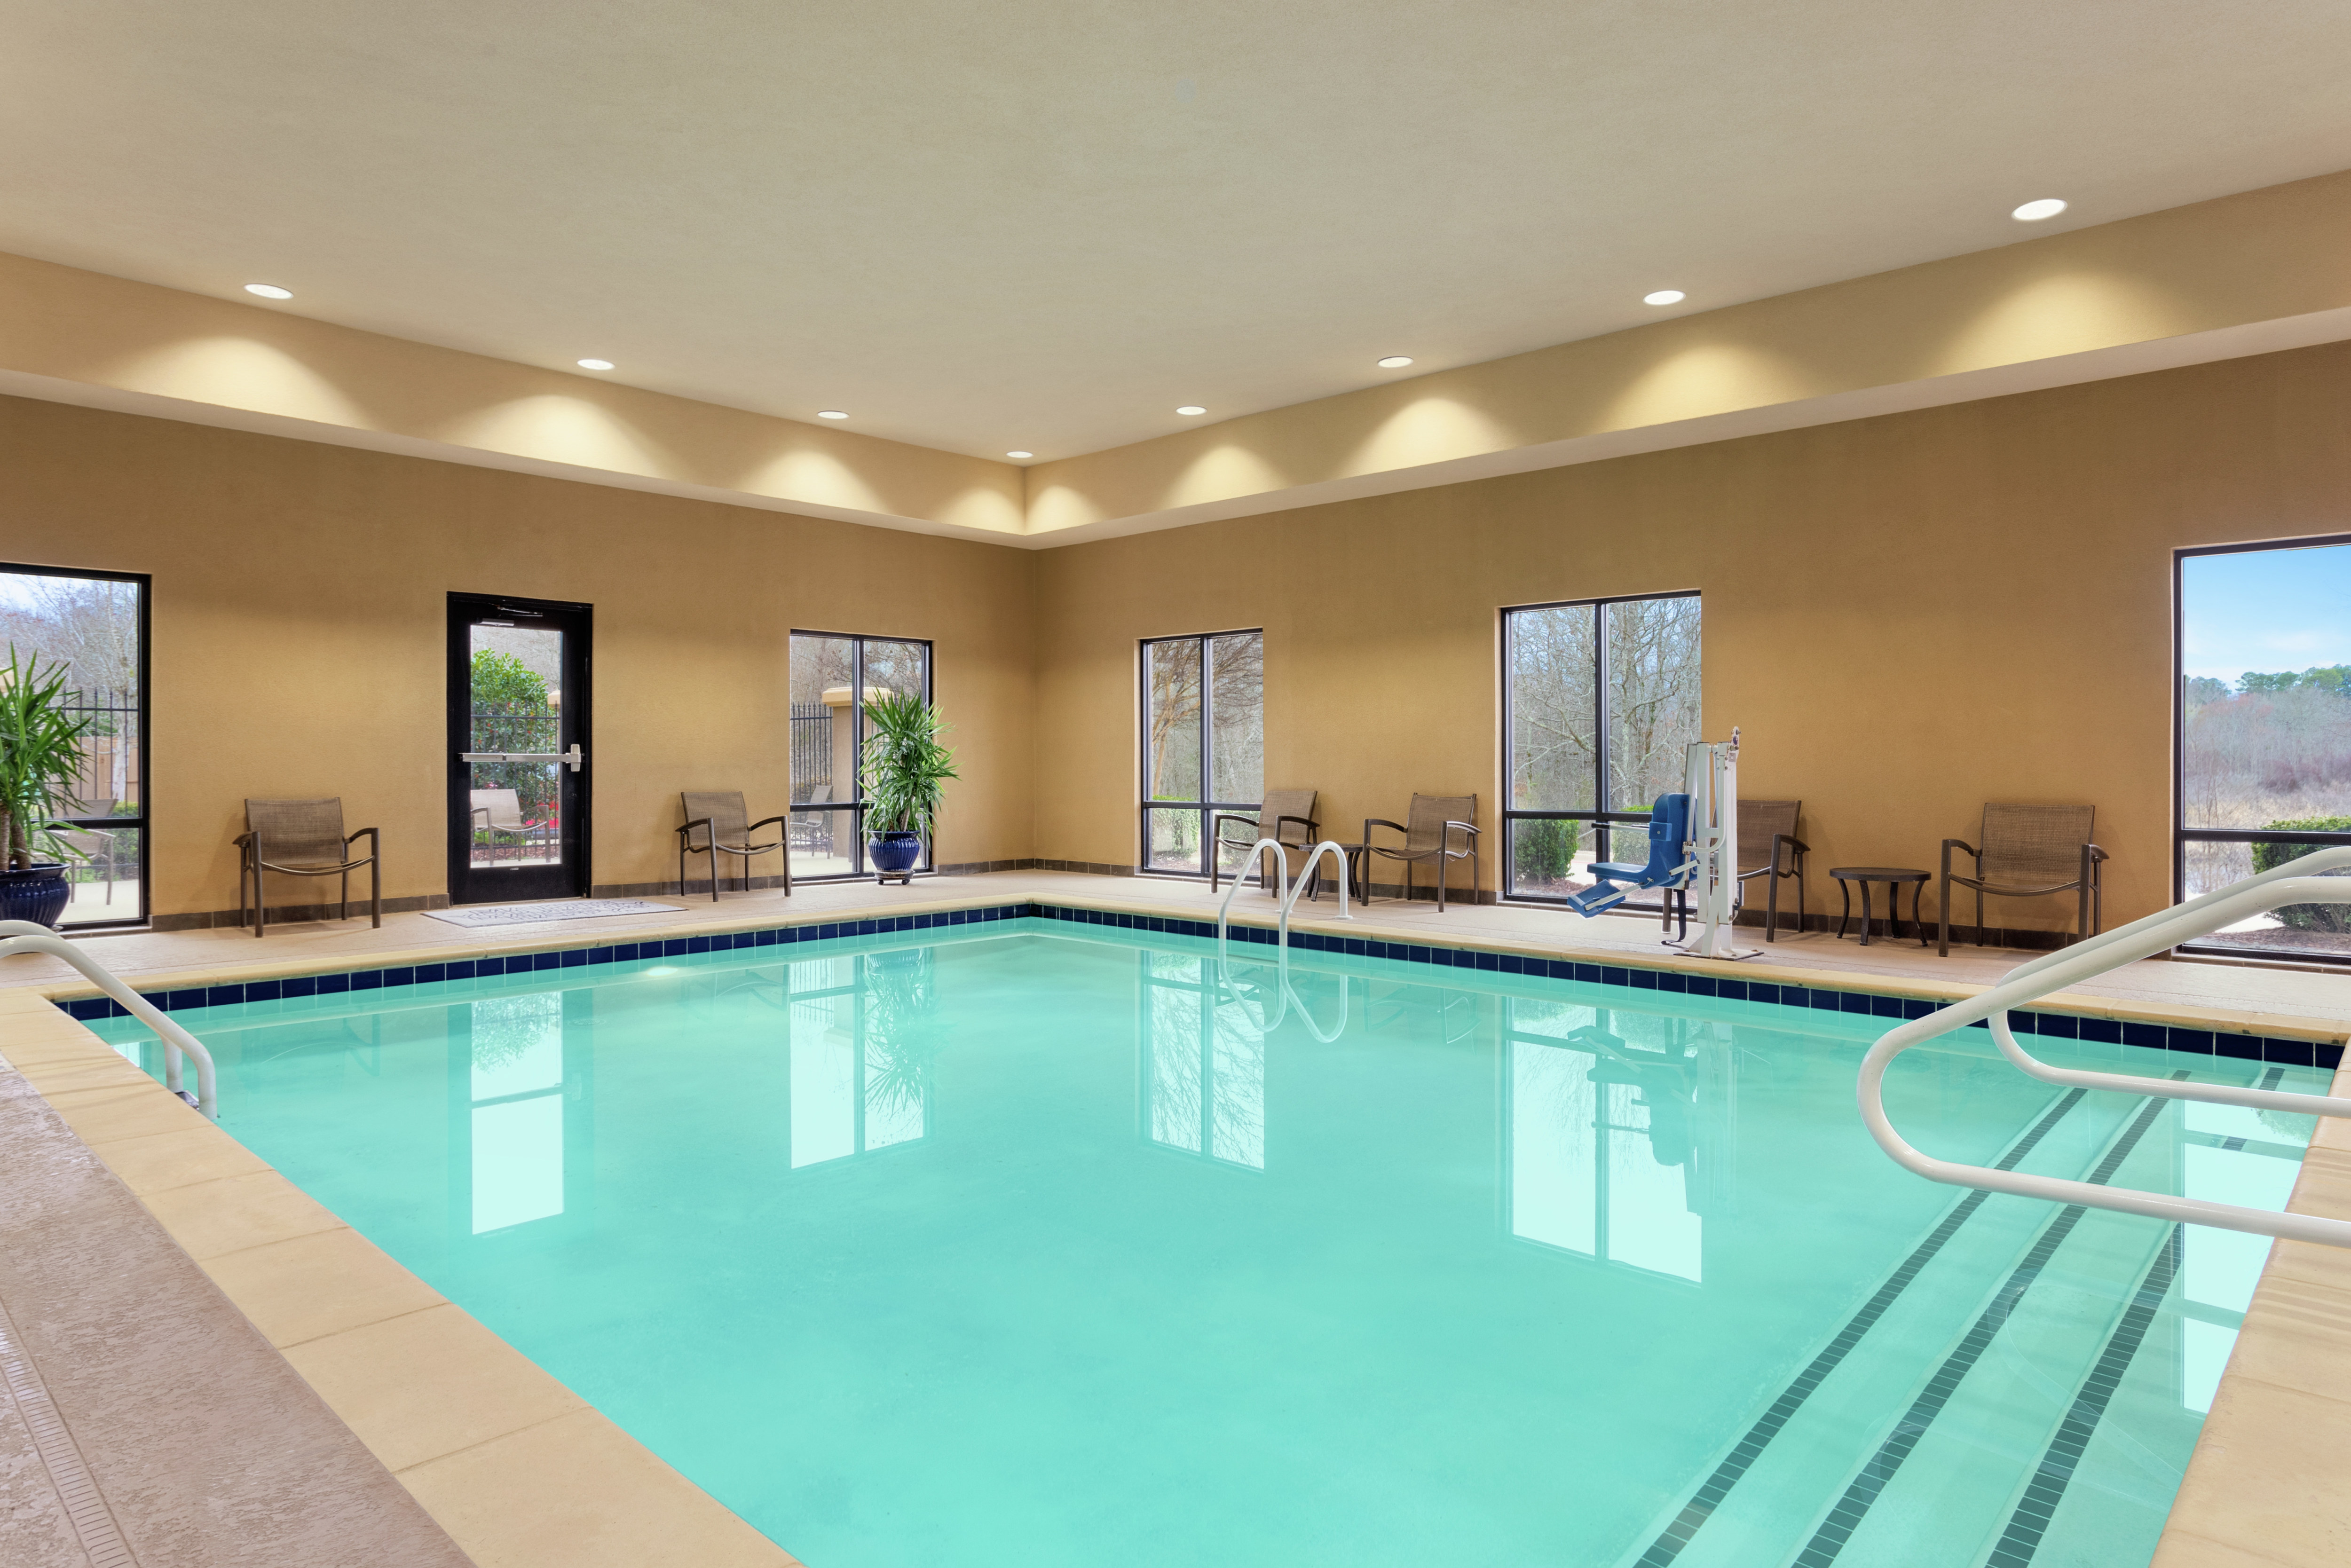 Spacious indoor pool featuring large windows with ample natural light, access to outdoor patio, and accessible chair-lift.